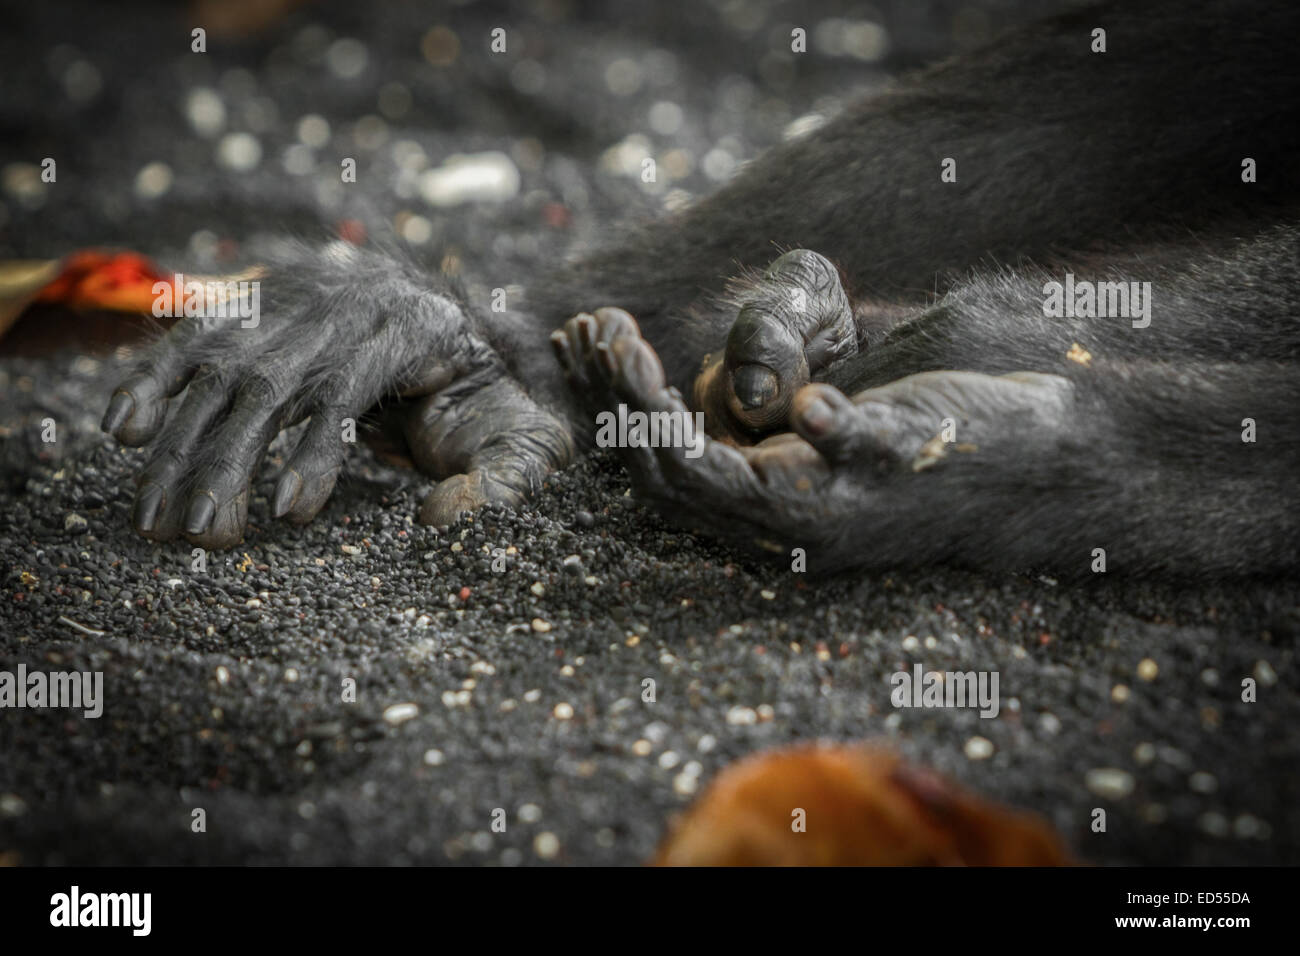 Hands and right foot of a Sulawesi black-crested macaque (Macaca nigra) that is taking a nap on the beach of Tangkoko, North Sulawesi, Indonesia. Stock Photo